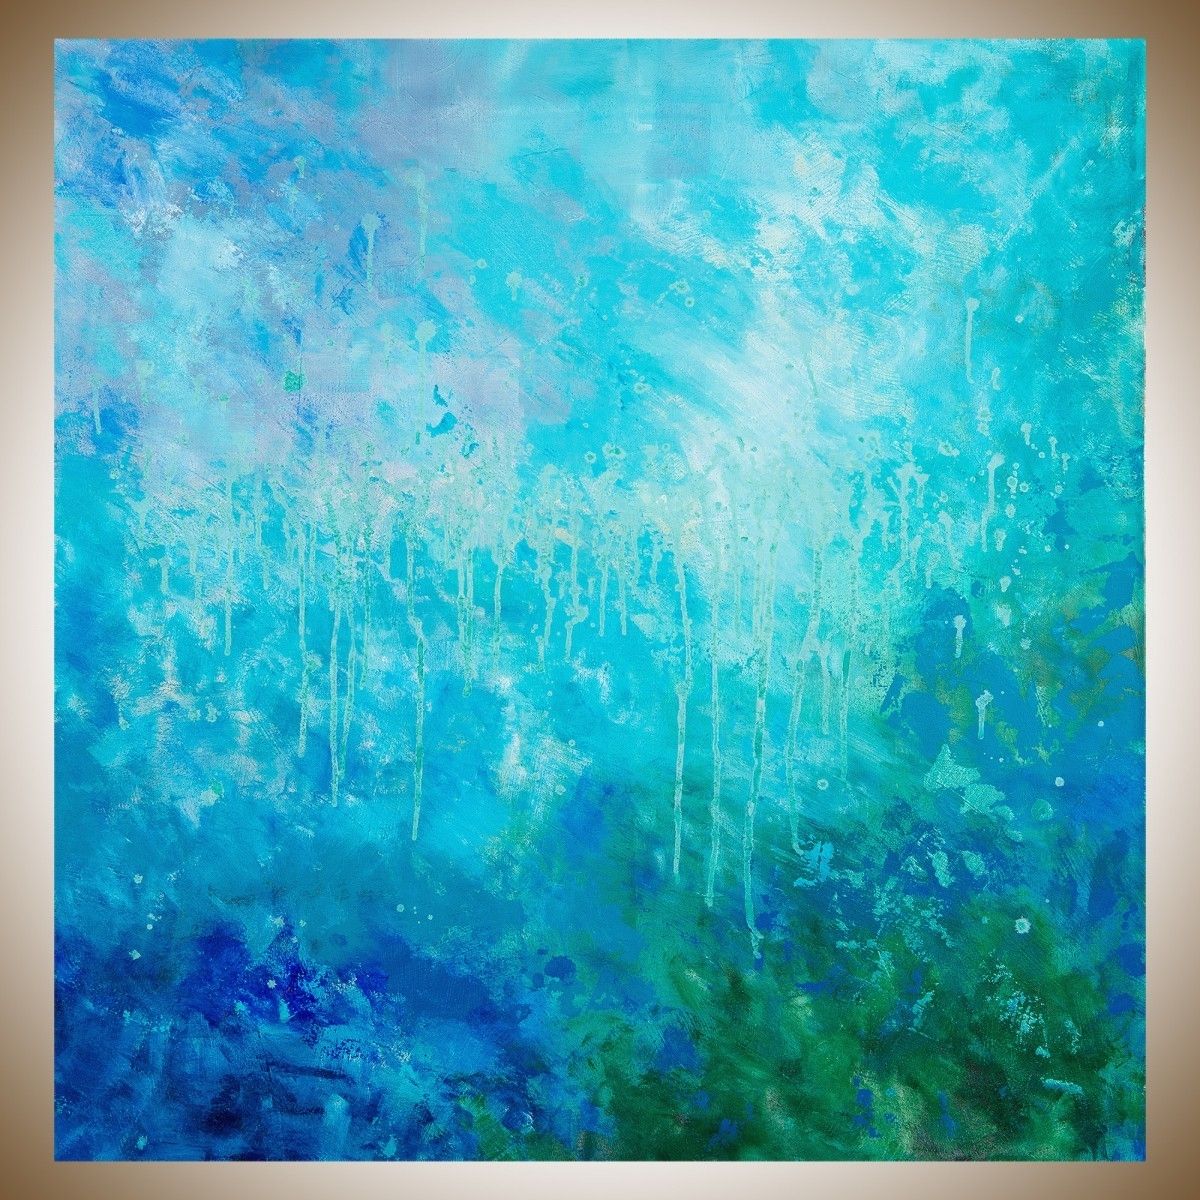 2017 Blue Canvas Wall Art For November Showerqiqigallery 40"x40" Un Stretched Canvas (View 14 of 15)